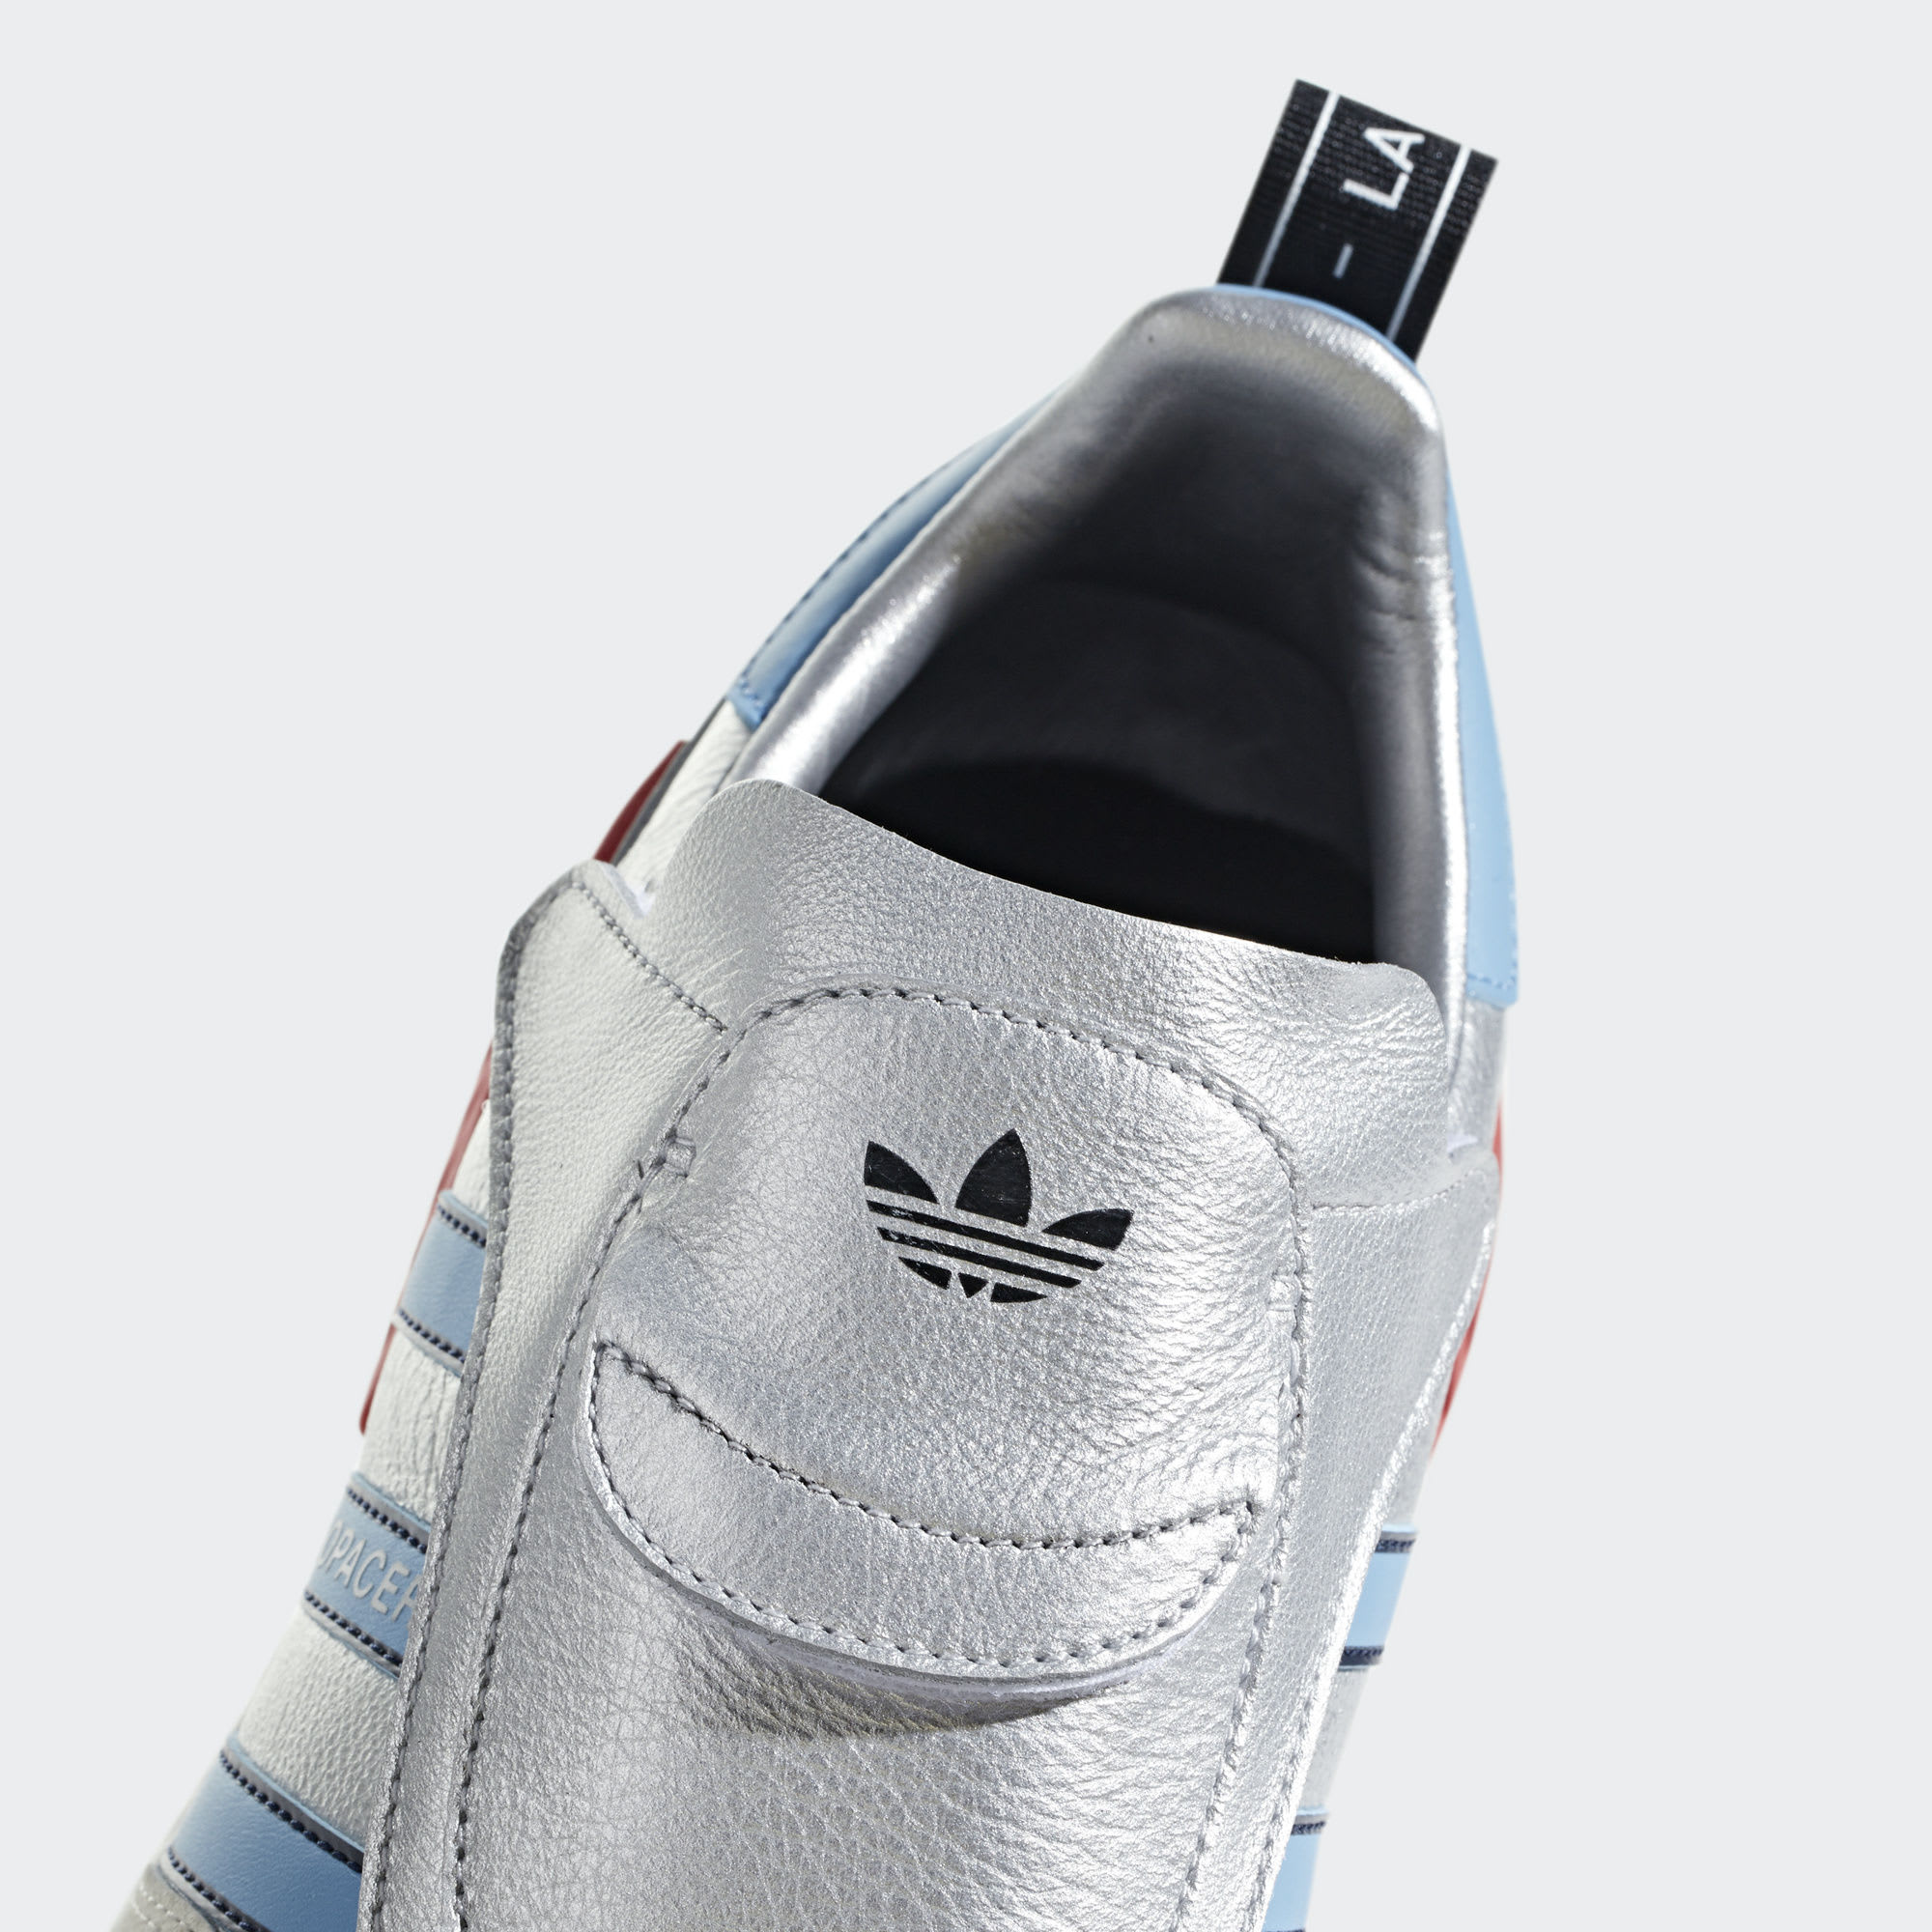 Adidas Micropacer NMD R1 Silver Release Date G26778 Tongue